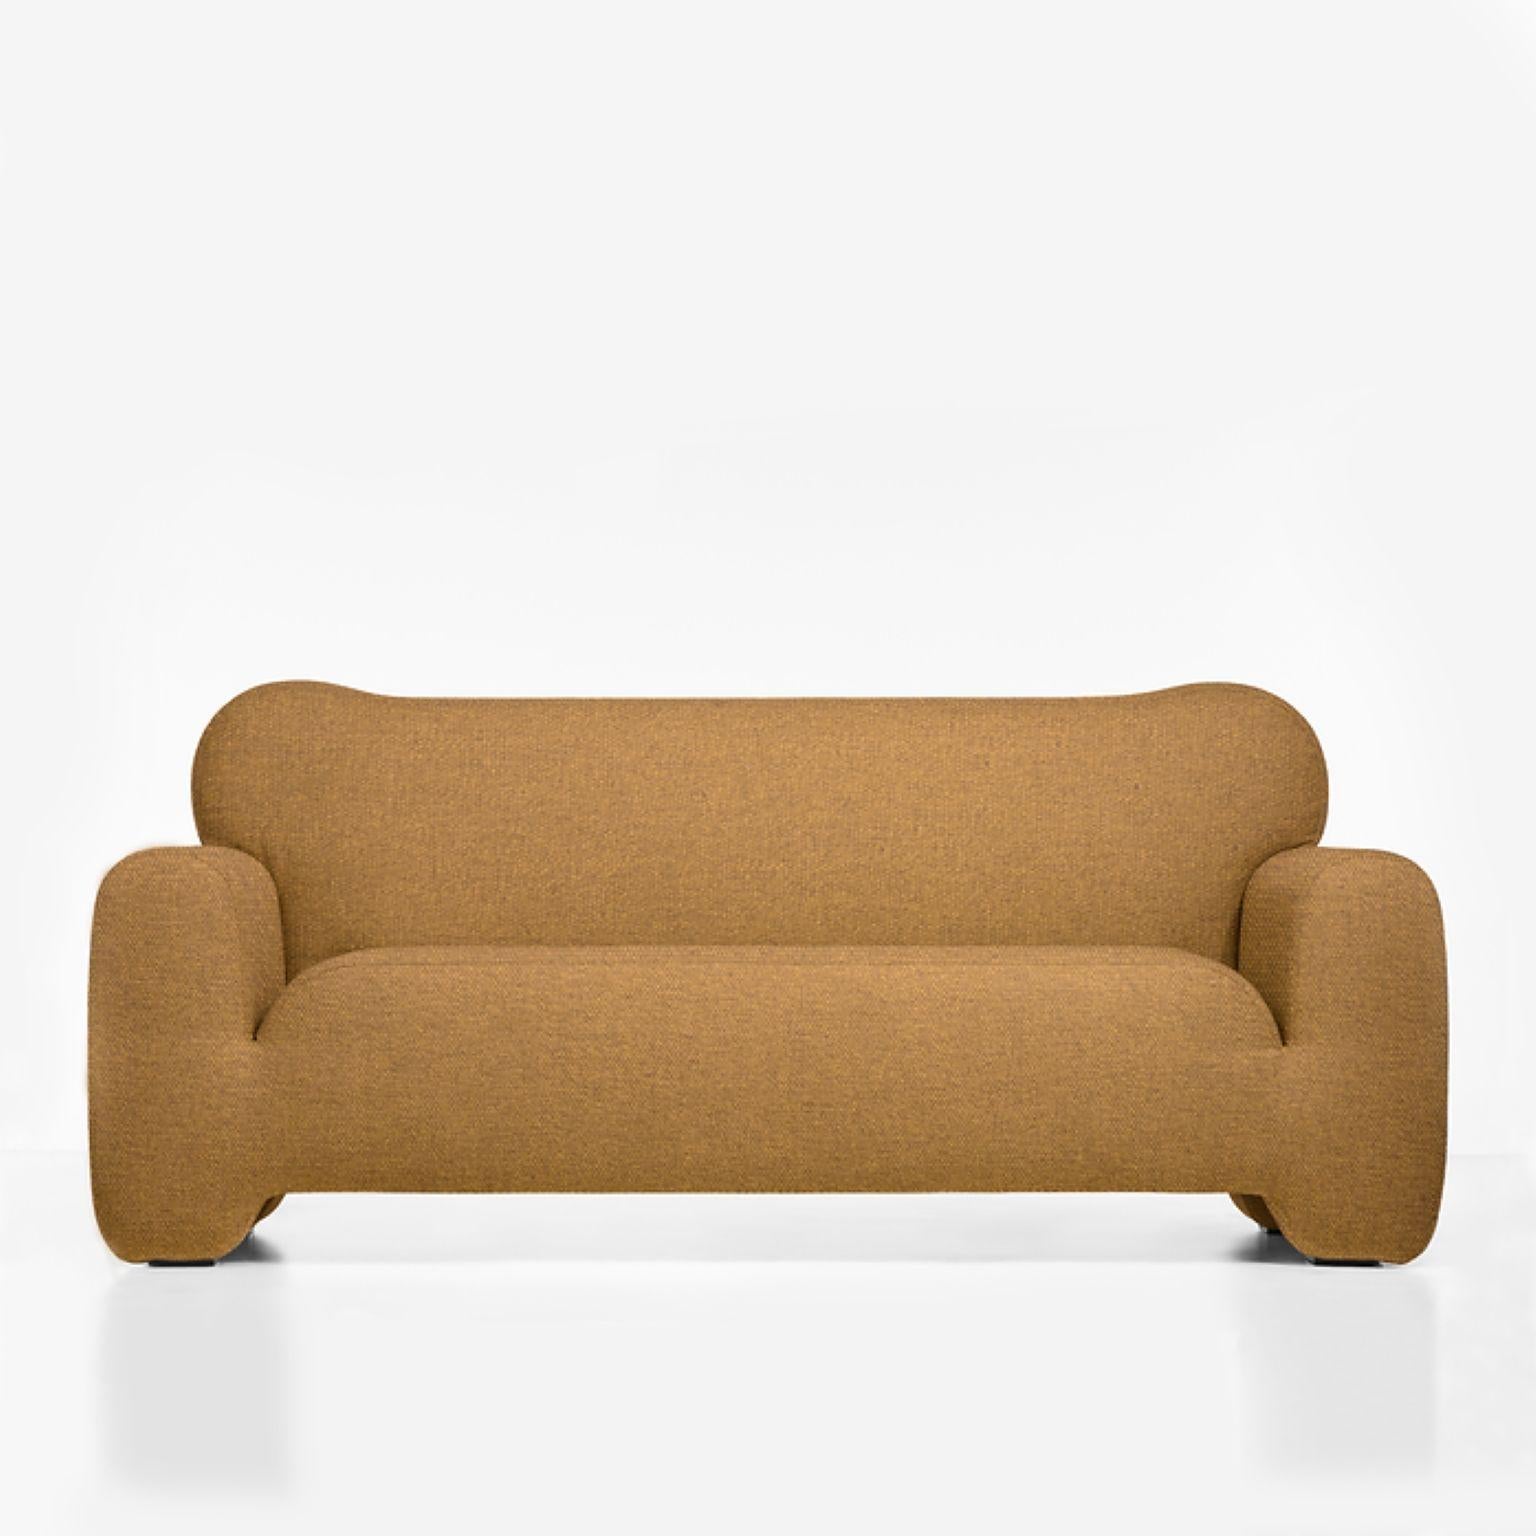 Pampukh sofa by Faina
Design: Victoriya Yakusha
Materials: Textile, foam rubber, sintepon, wood
Dimensions: W 240 x D 82 x H 79 cm

Unusual convex lines of the PAMPUKH series are ideally combined with its volumetric silhouette. PAMPUKH seems to